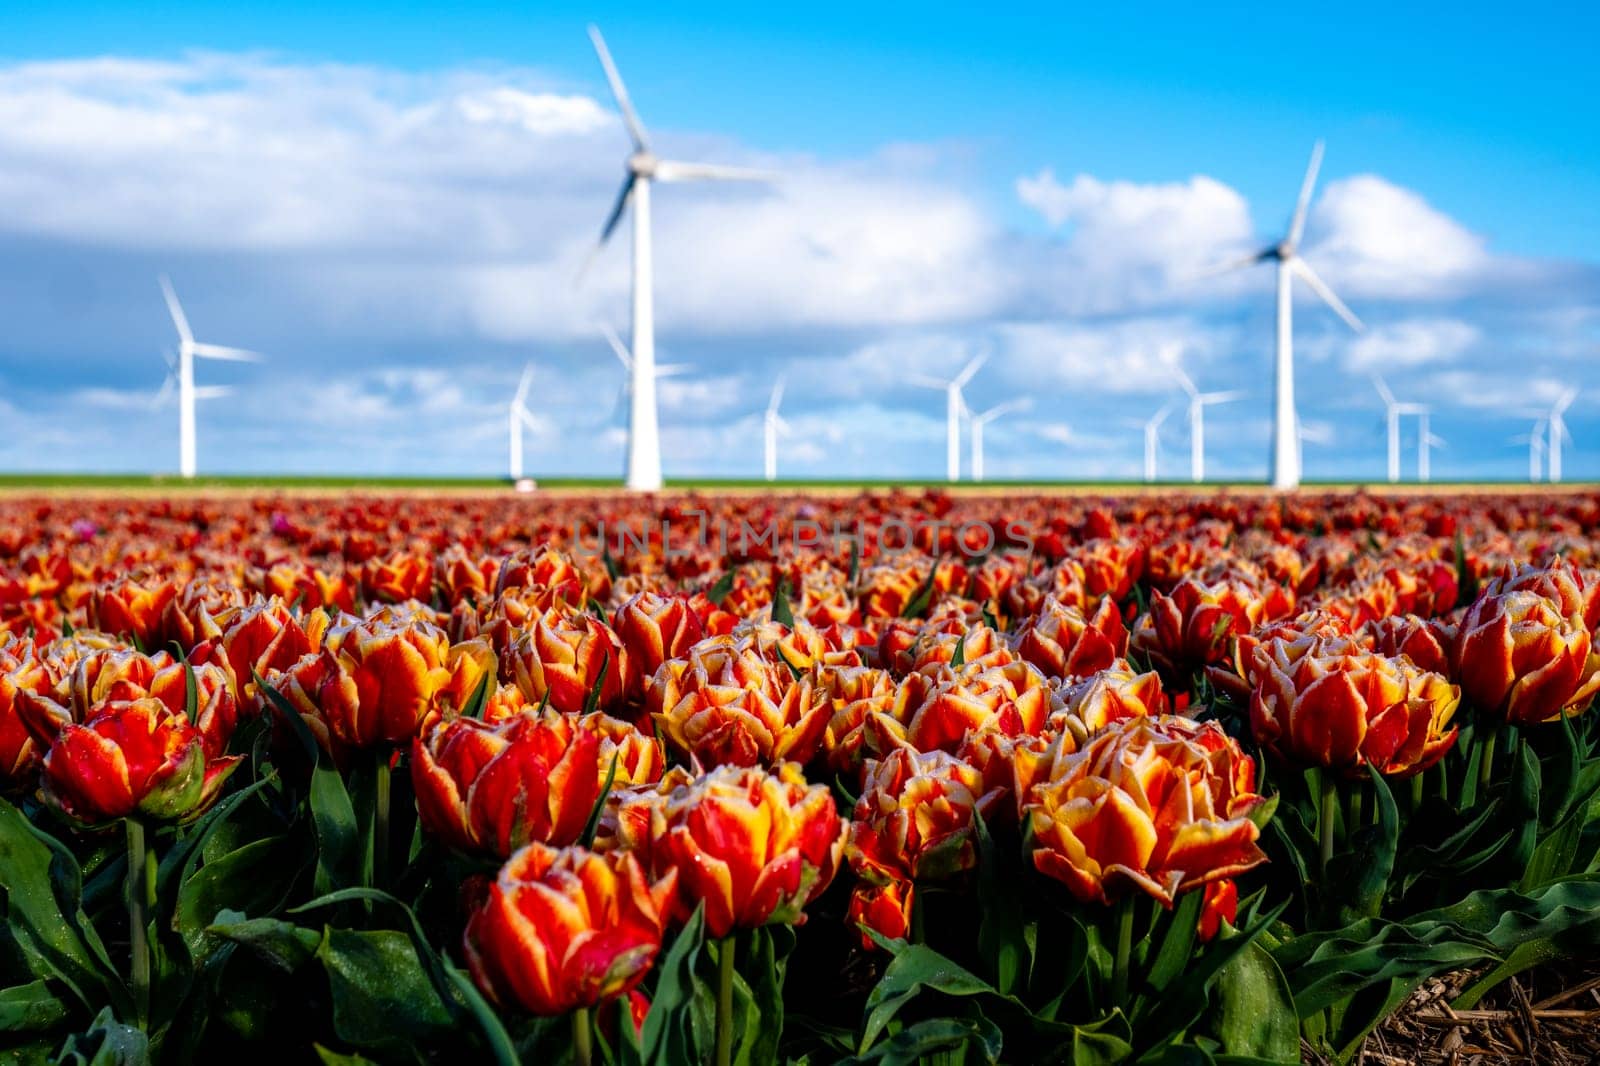 A vibrant field of red and yellow tulips swayed gently in the wind, with windmill turbines towering in the background against a clear blue sky. in the Noordoostpolder Netherlands